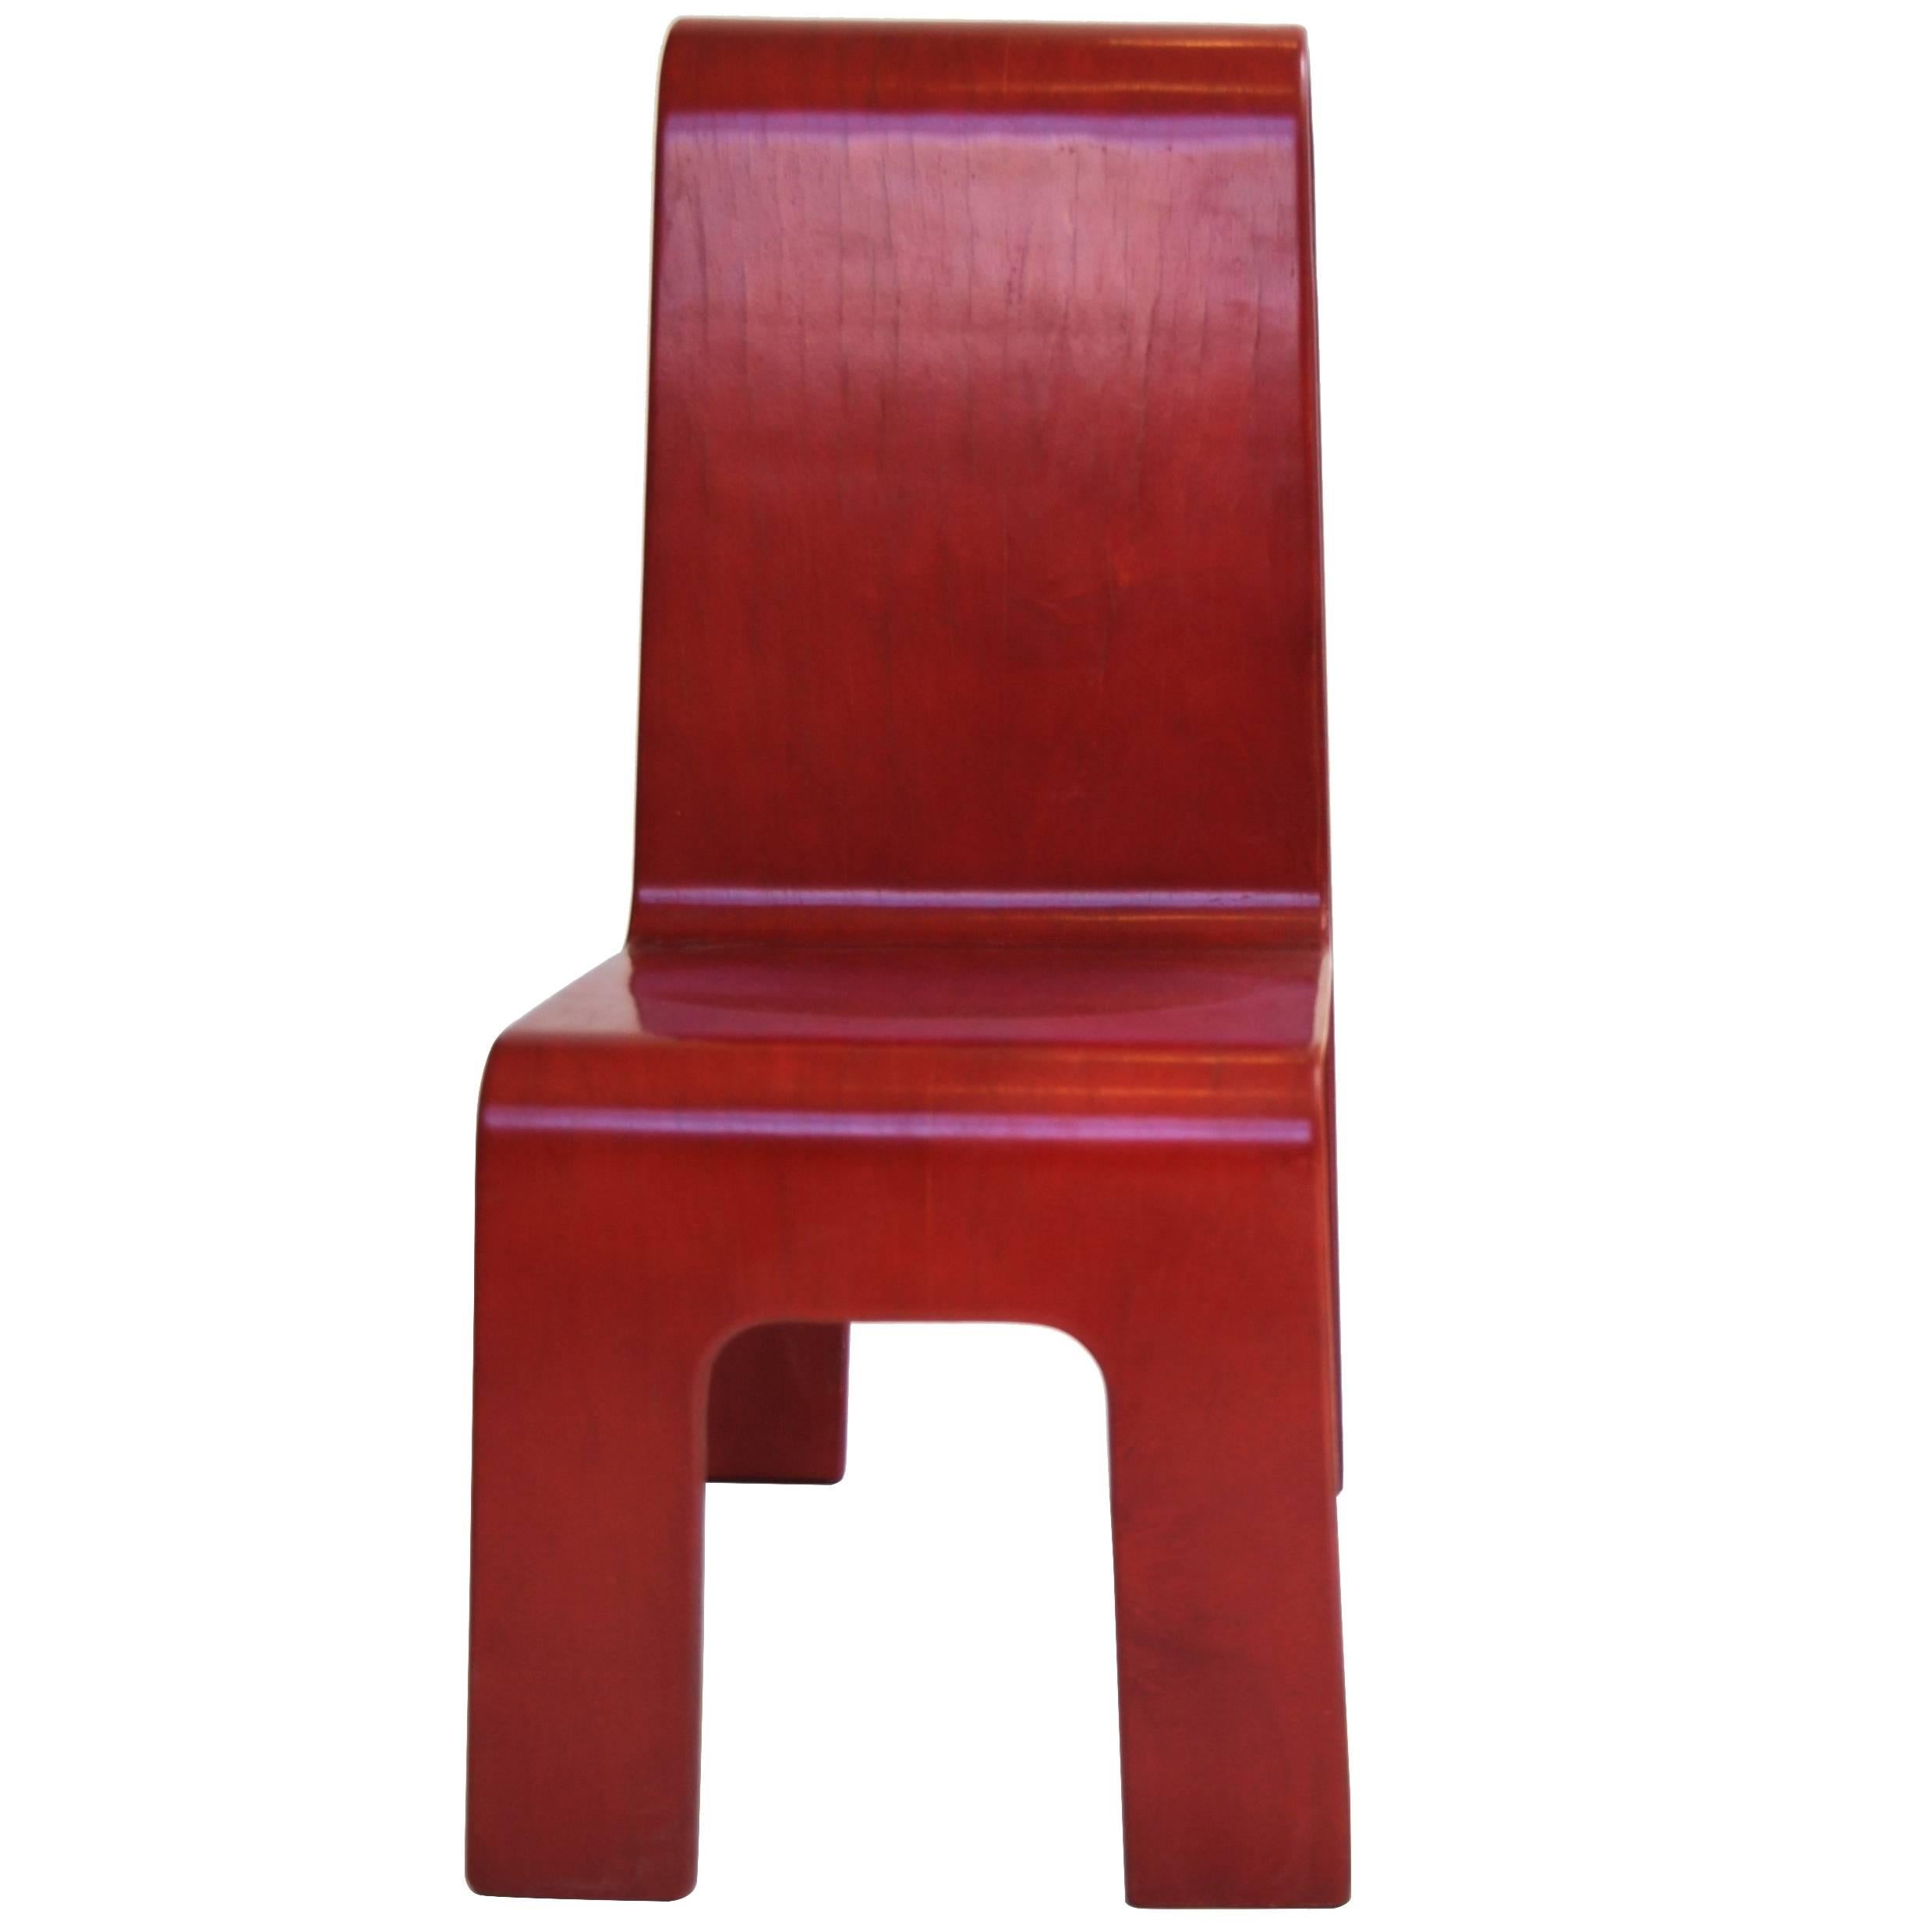 Kinder-Link Molded Maple Plywood Cut-Out Child Chair by Isku, Finland, in Red For Sale